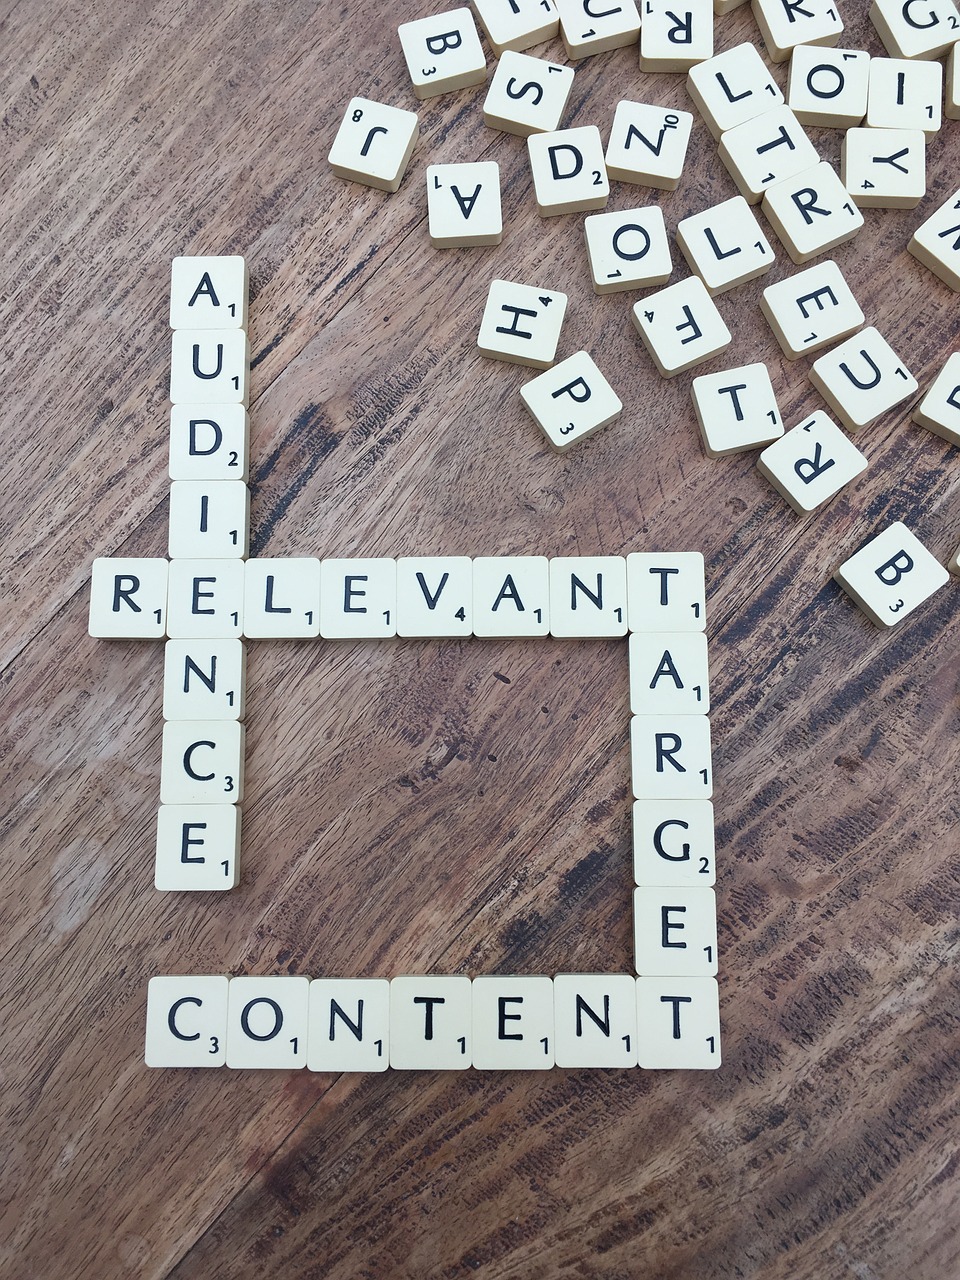 Scrabble tiles on wooden surface forming words content, audience, relevant and target